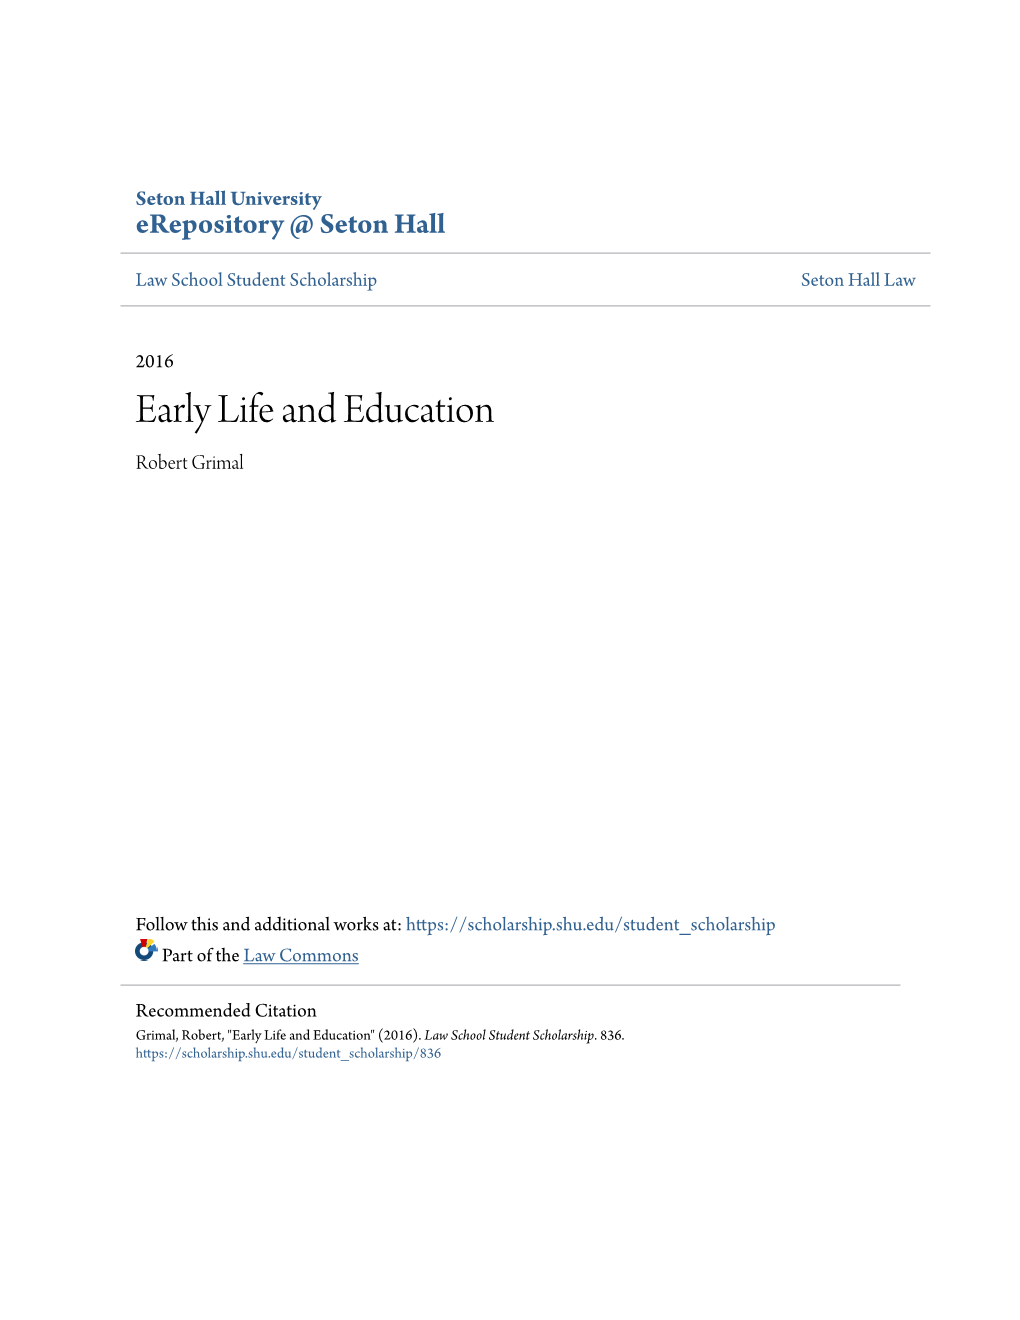 Early Life and Education Robert Grimal